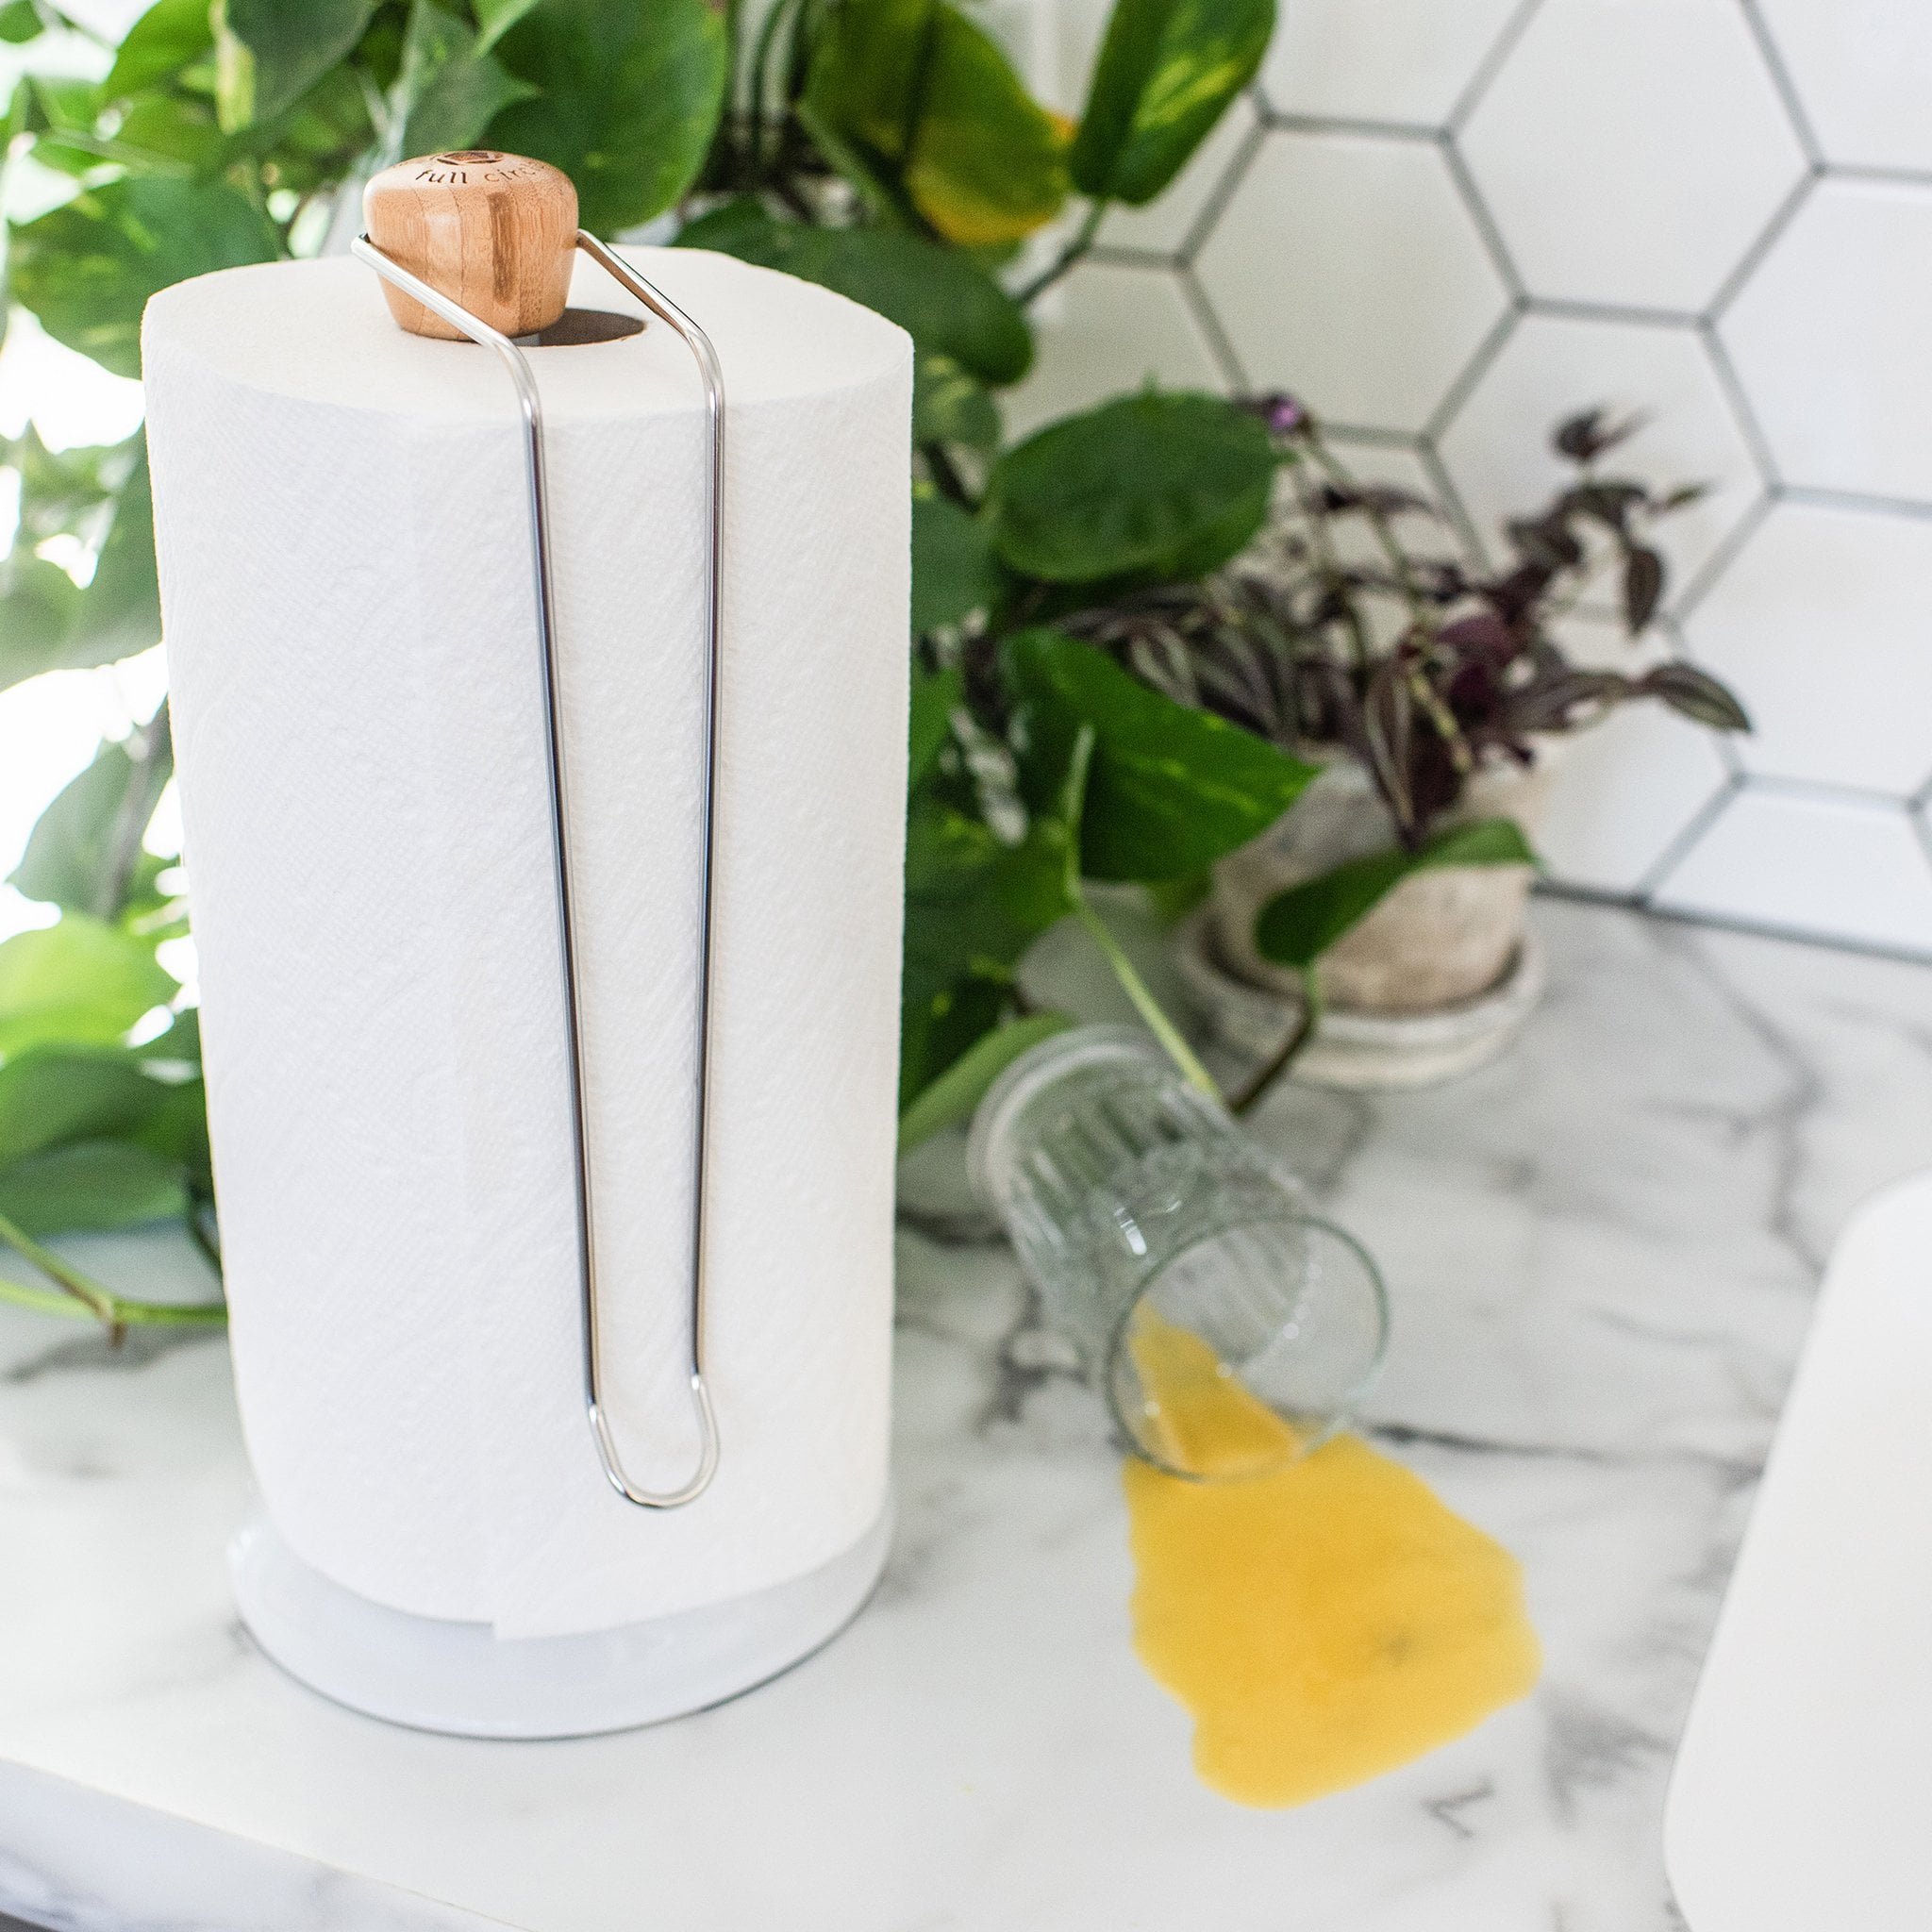 White Ceramic and Stainless Steel Paper Towel Holder with 5